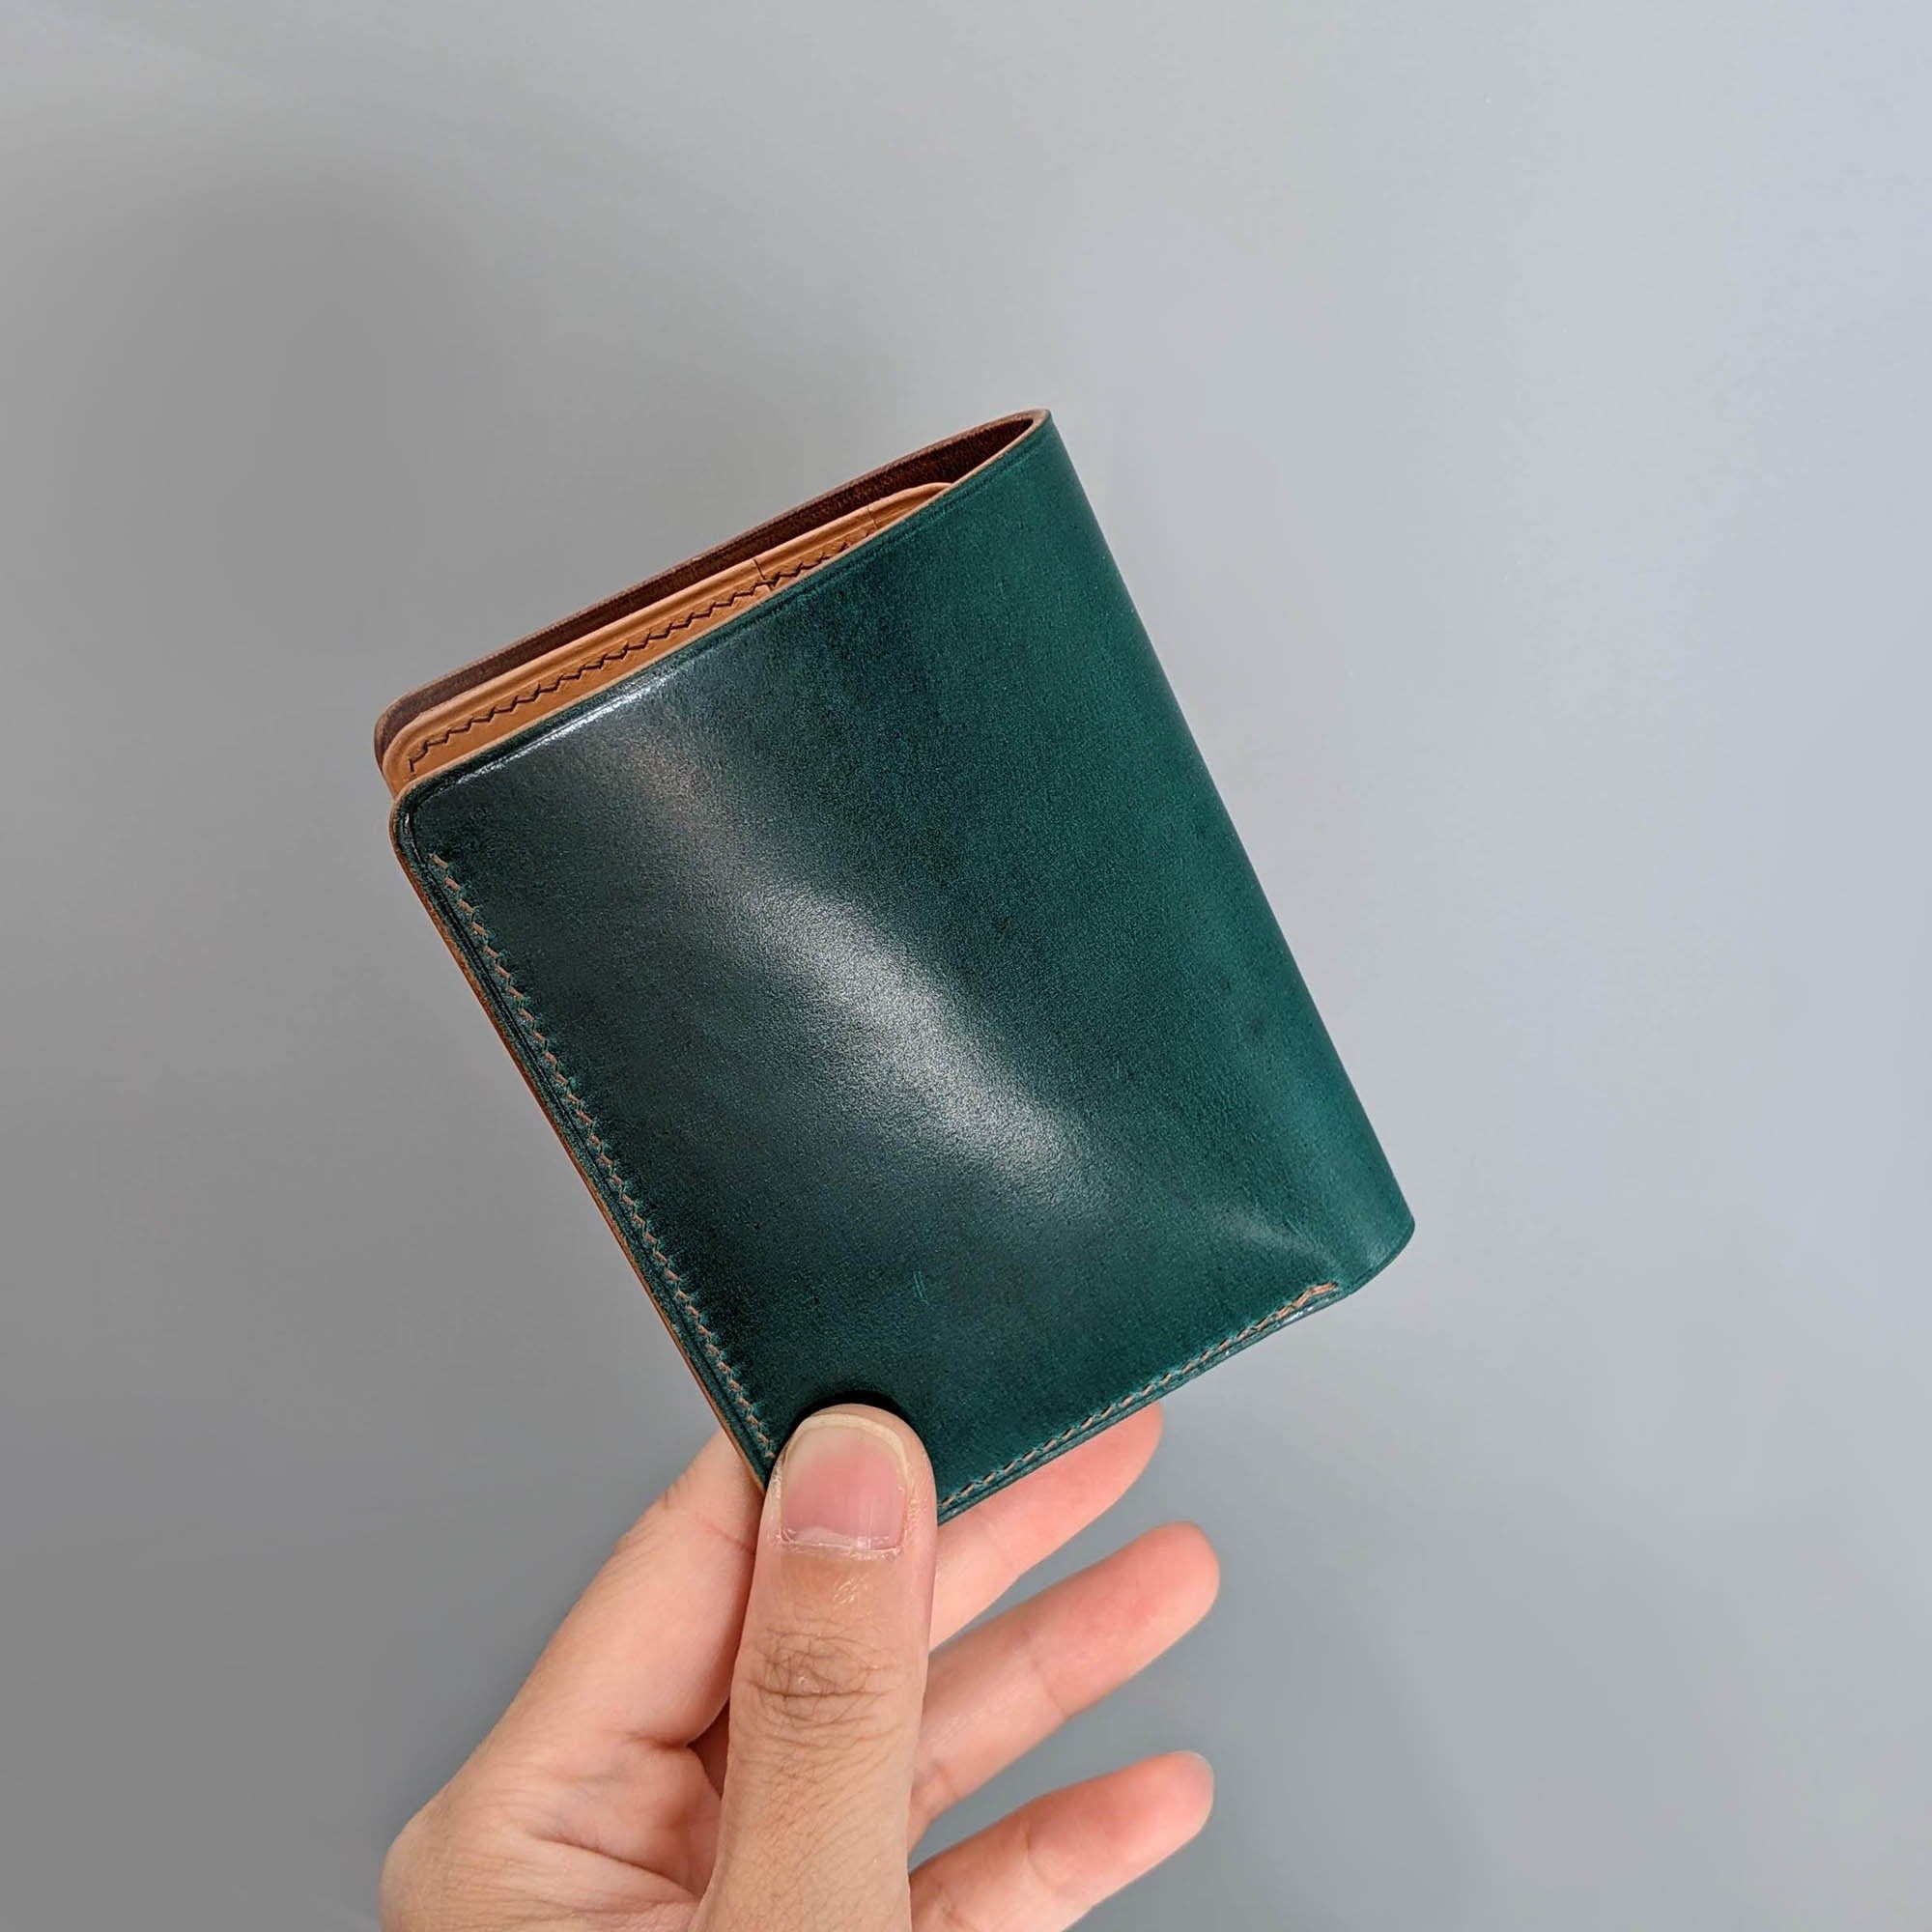 Handmade Shell Cordovan 4 Card Slot Bifold Turquoise Teal Natural Vegetable Tanned Leather from Italy with Brown Thread Ready to Ship